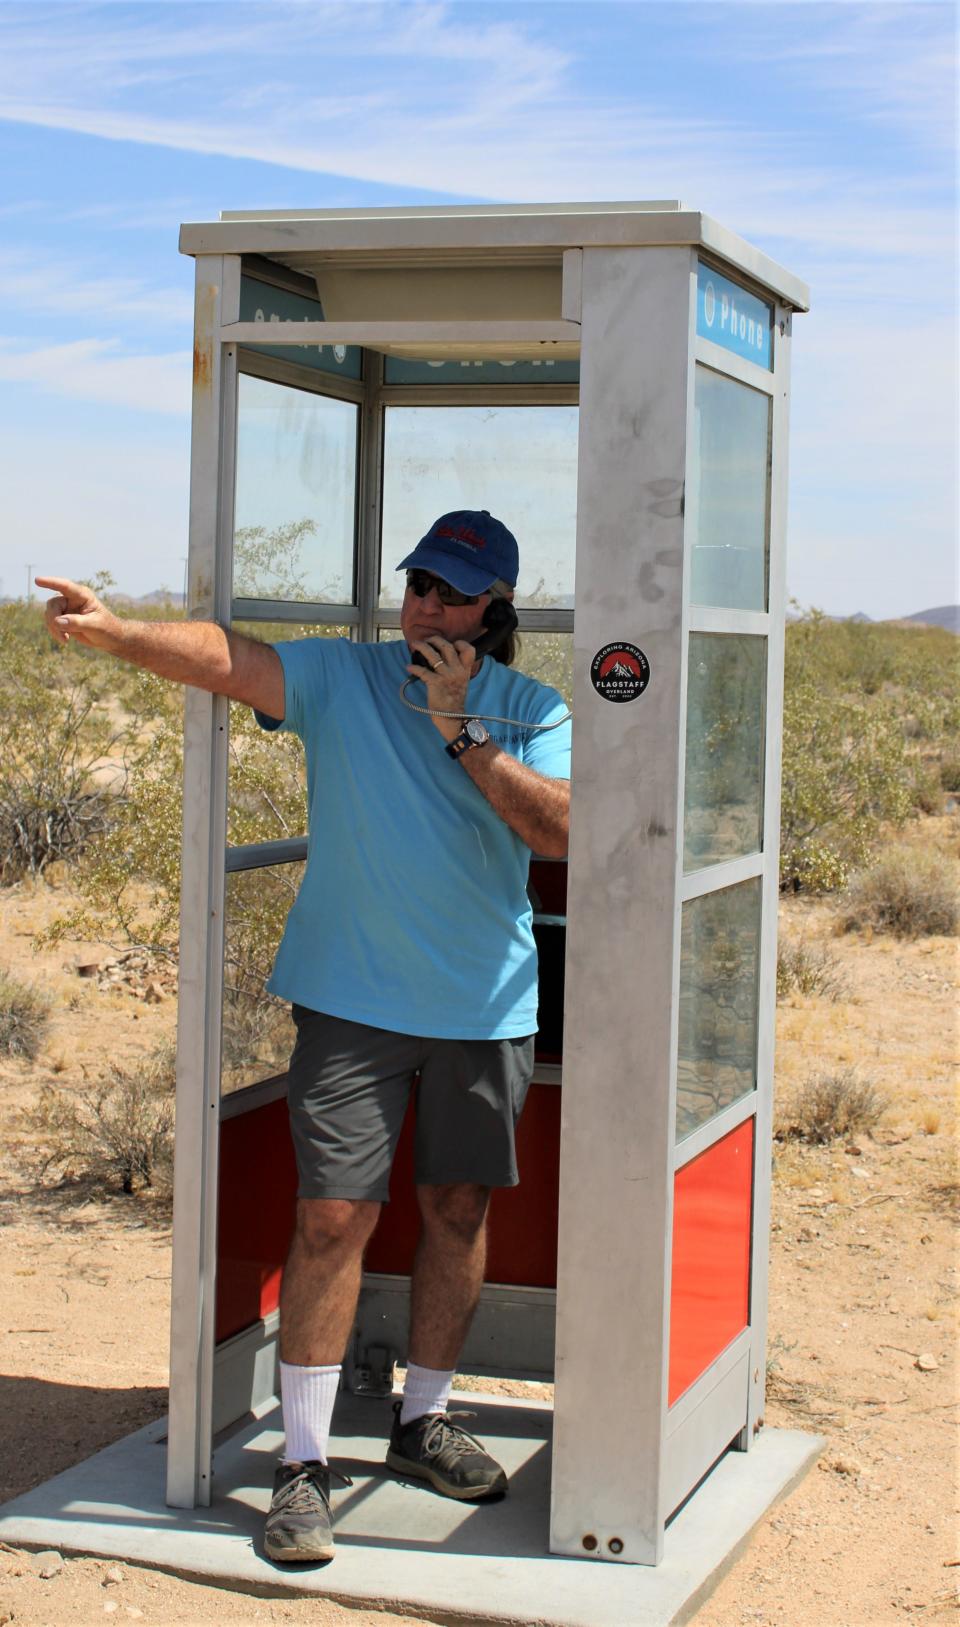 John in the iconic phone booth off Highway 66 for his latest Beyer's Byways column.